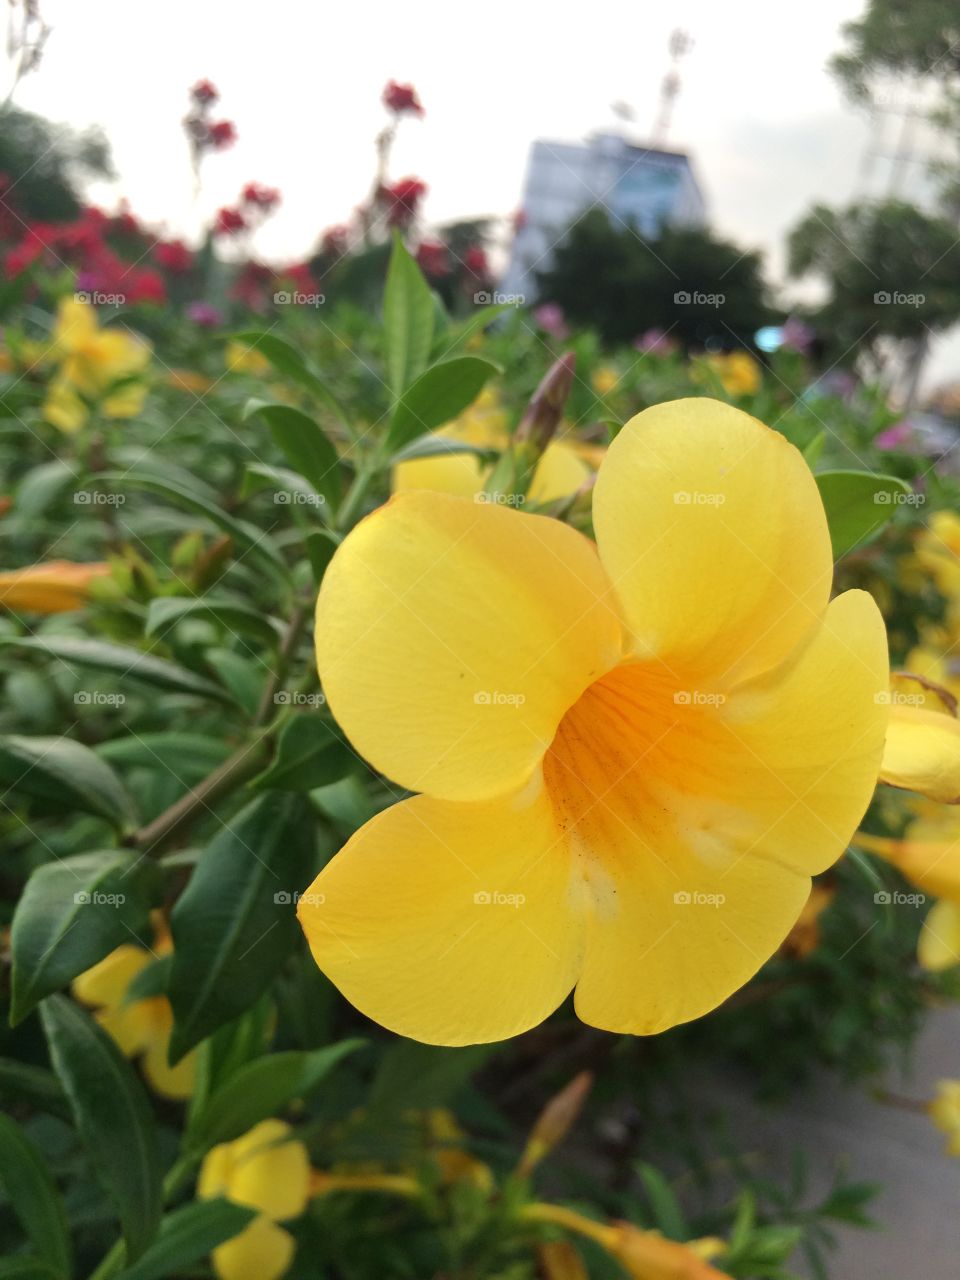 Flower from the side road. I'm yellow. I'm just a flower beside the road but I am beautiful.